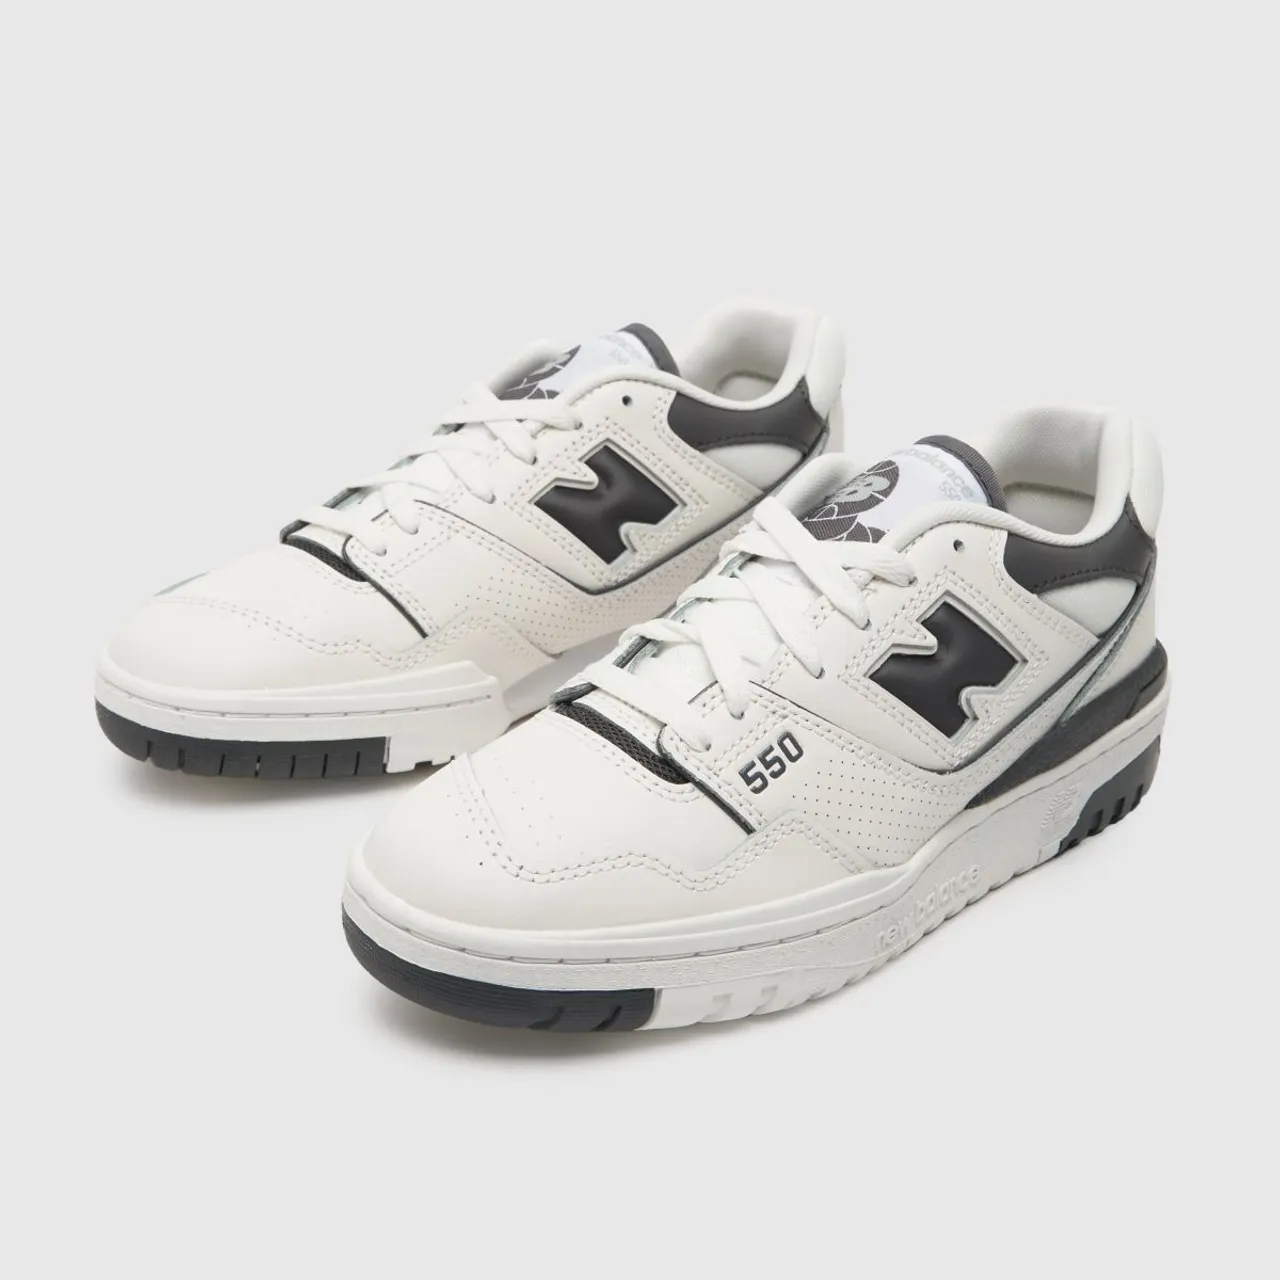 New Balance 550 Trainers In White & Black